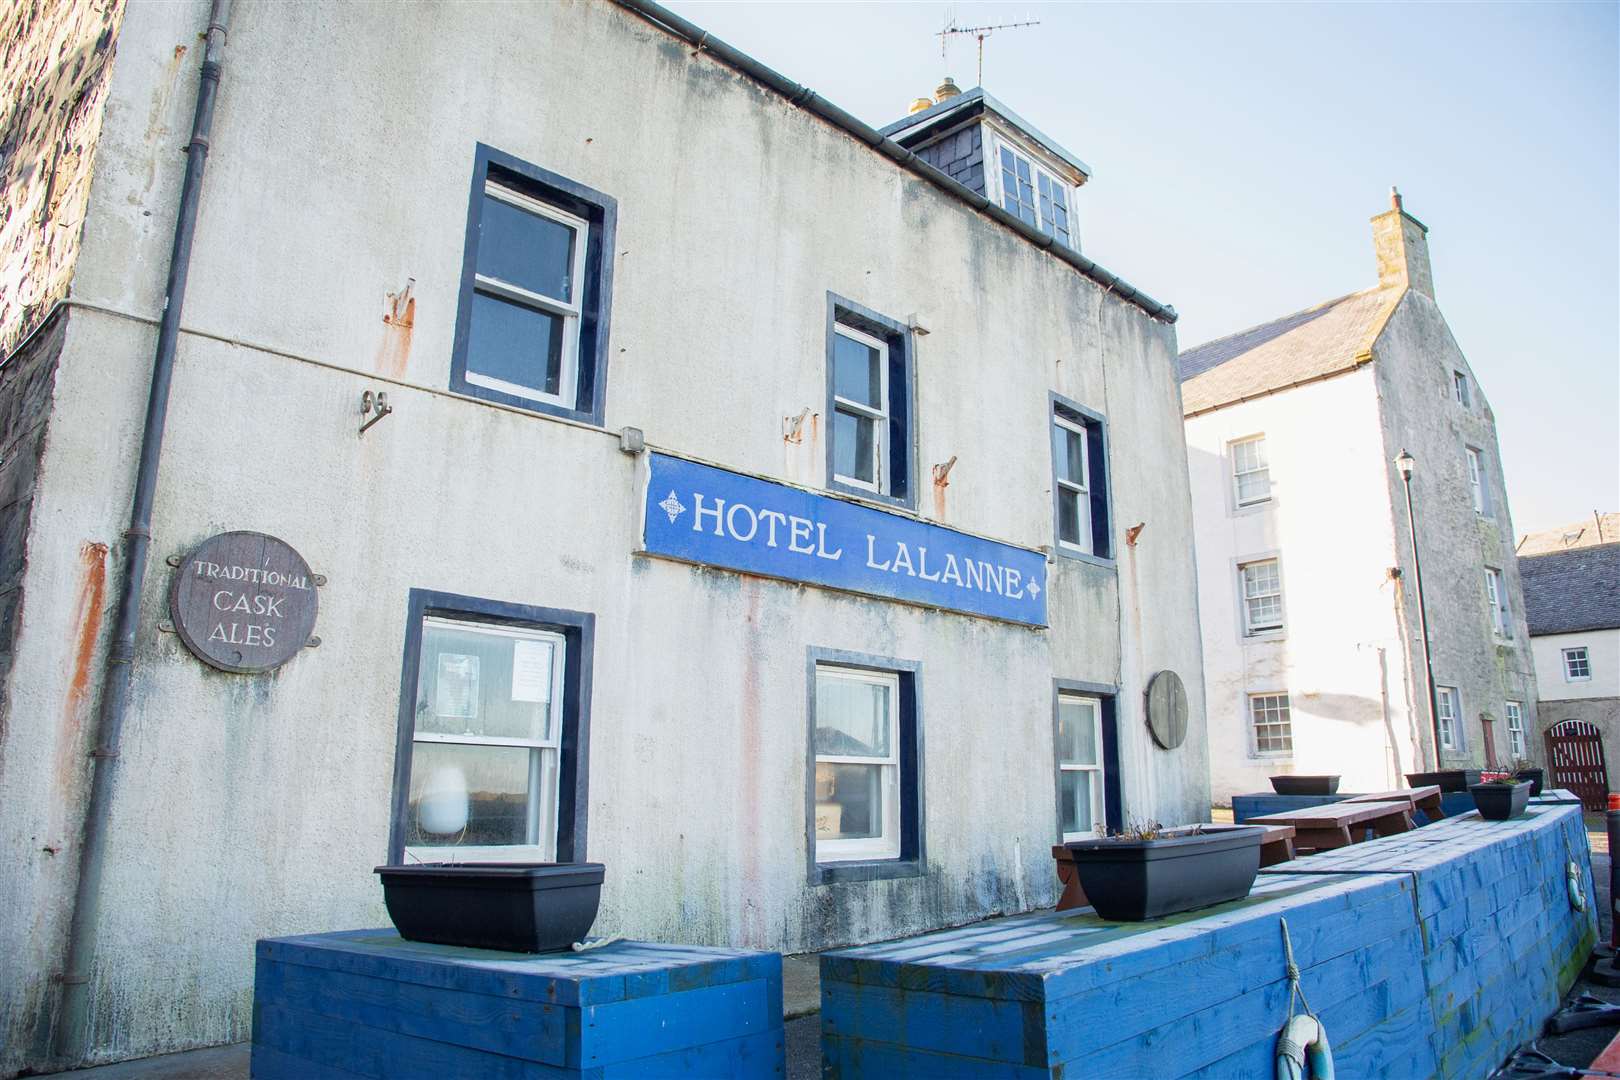 The Shore Inn, in Portsoy, has been temporarily renamed "Hotel Lalanne" for filming and painted in a murky off-white. Picture: Daniel Forsyth.